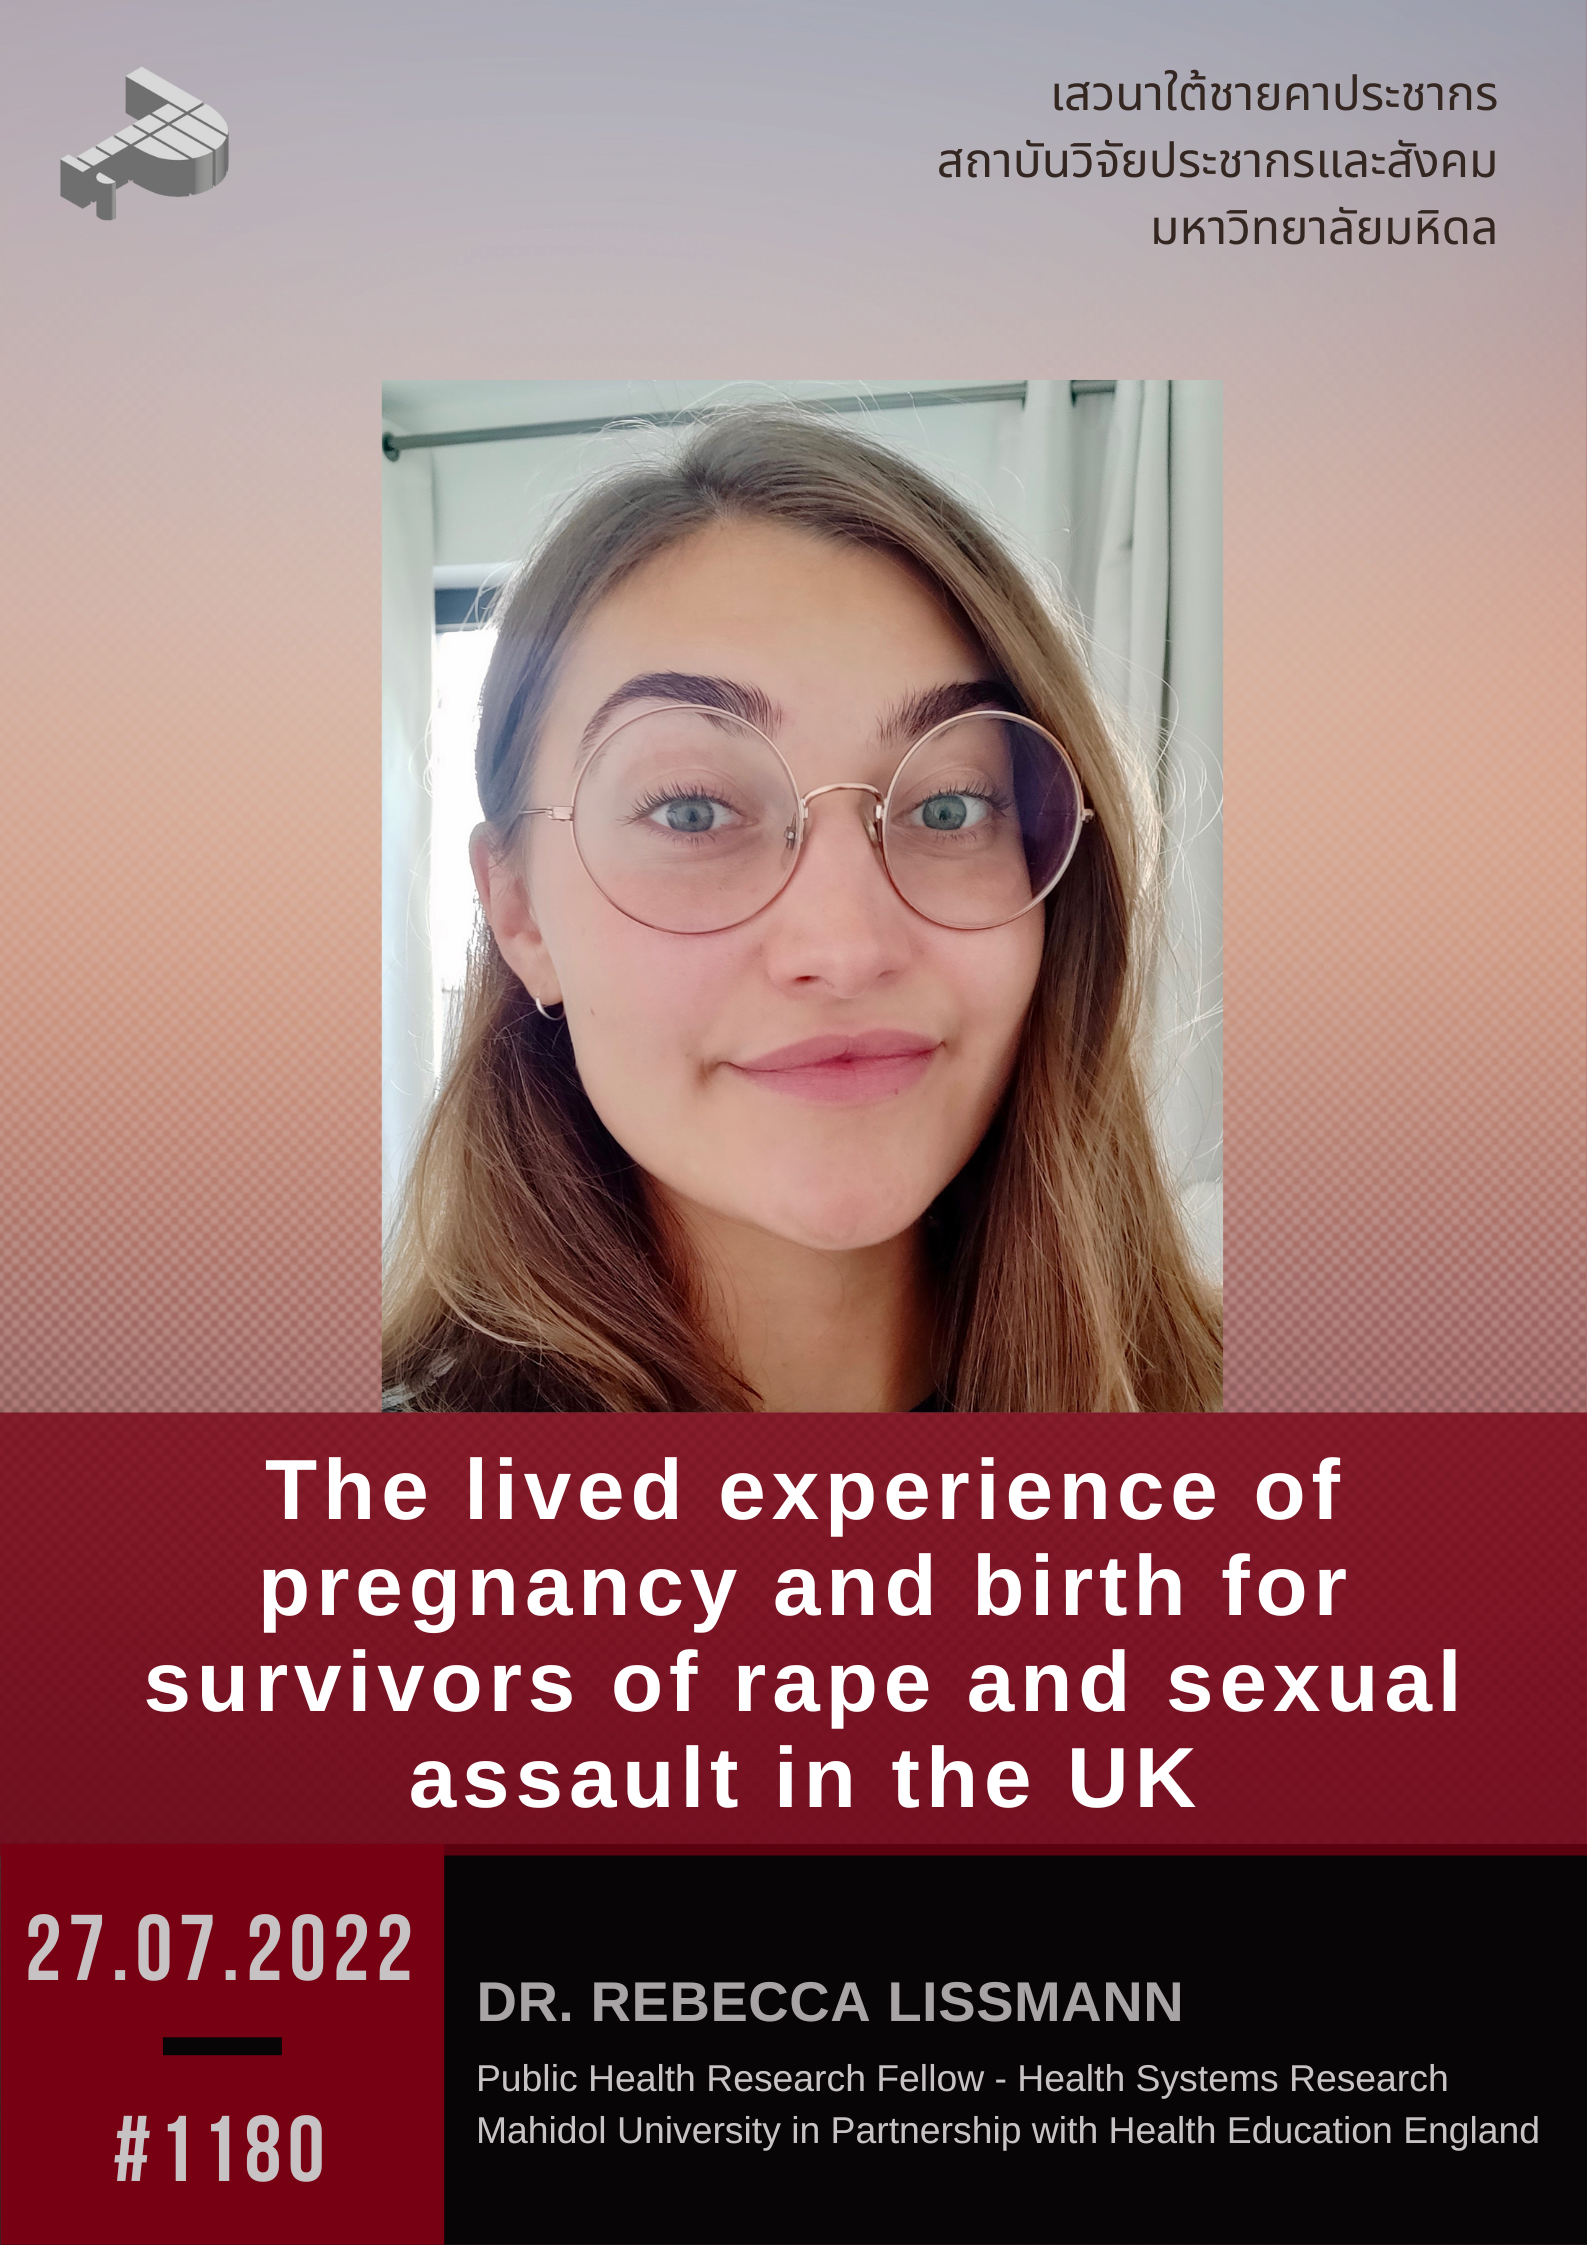 The lived experience of pregnancy and birth for survivors of rape and sexual assault in the UK